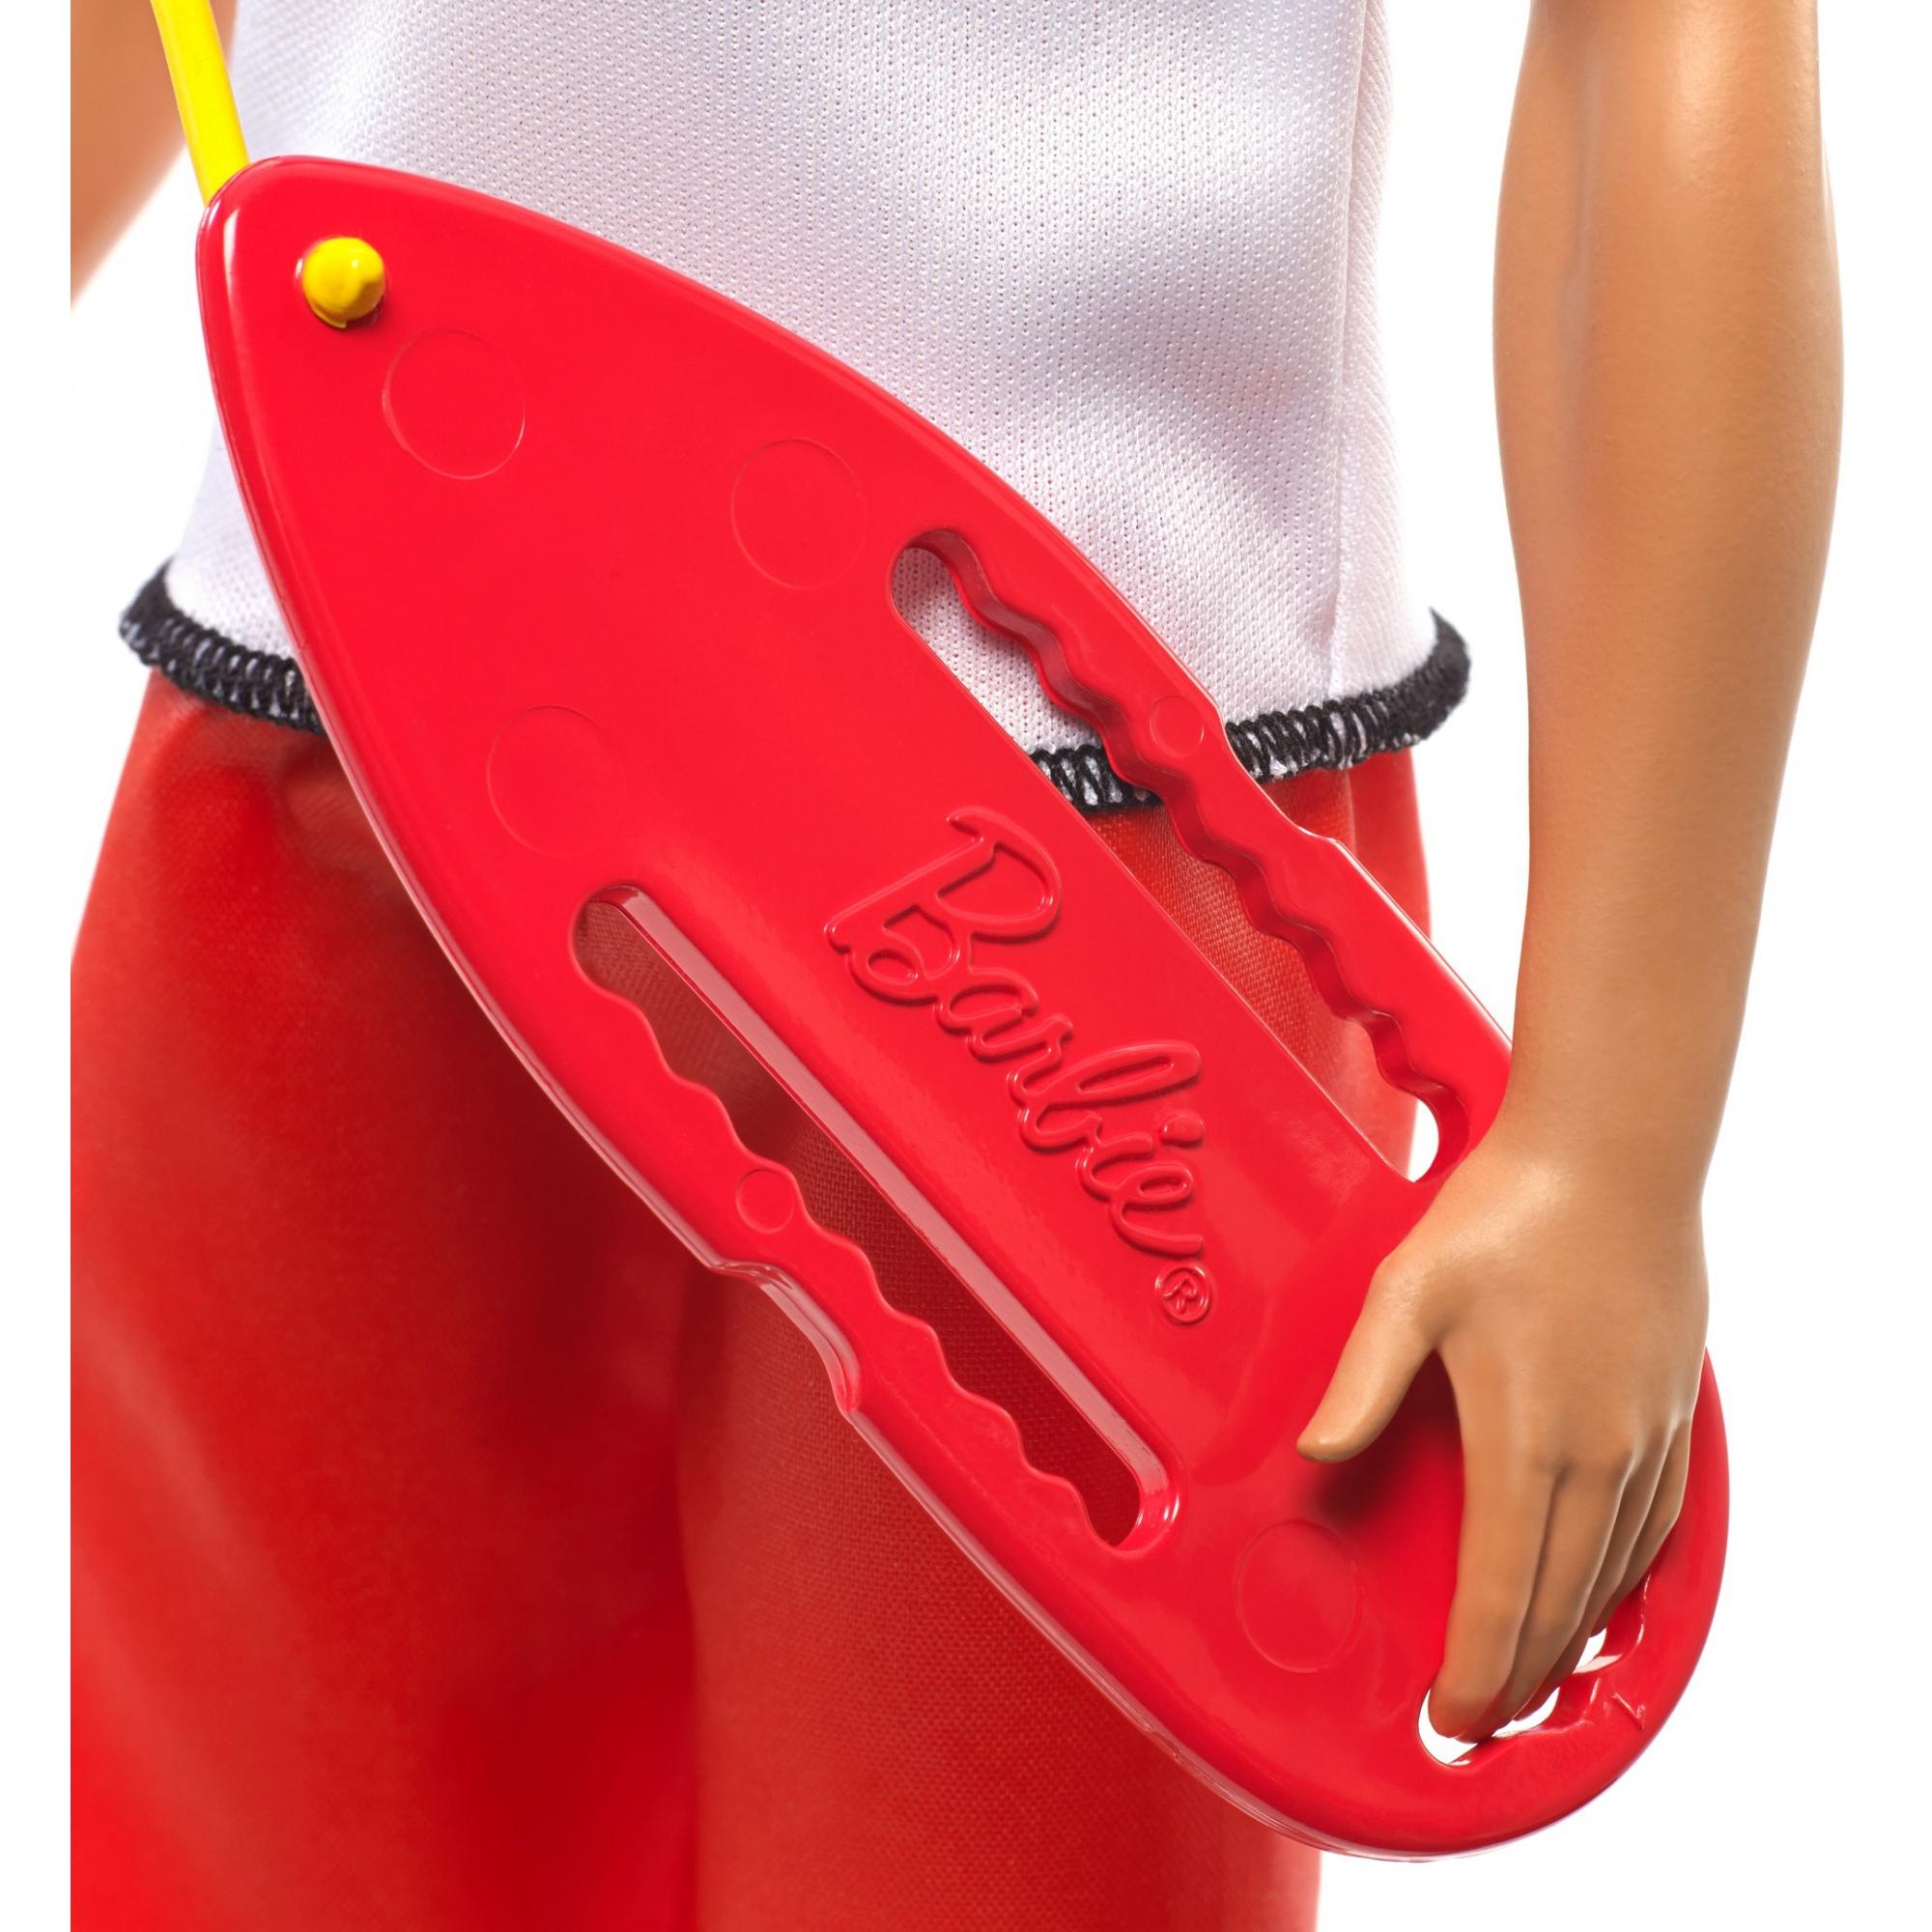 Barbie Ken Careers Lifeguard Doll with Career-Themed Accessories - image 5 of 6